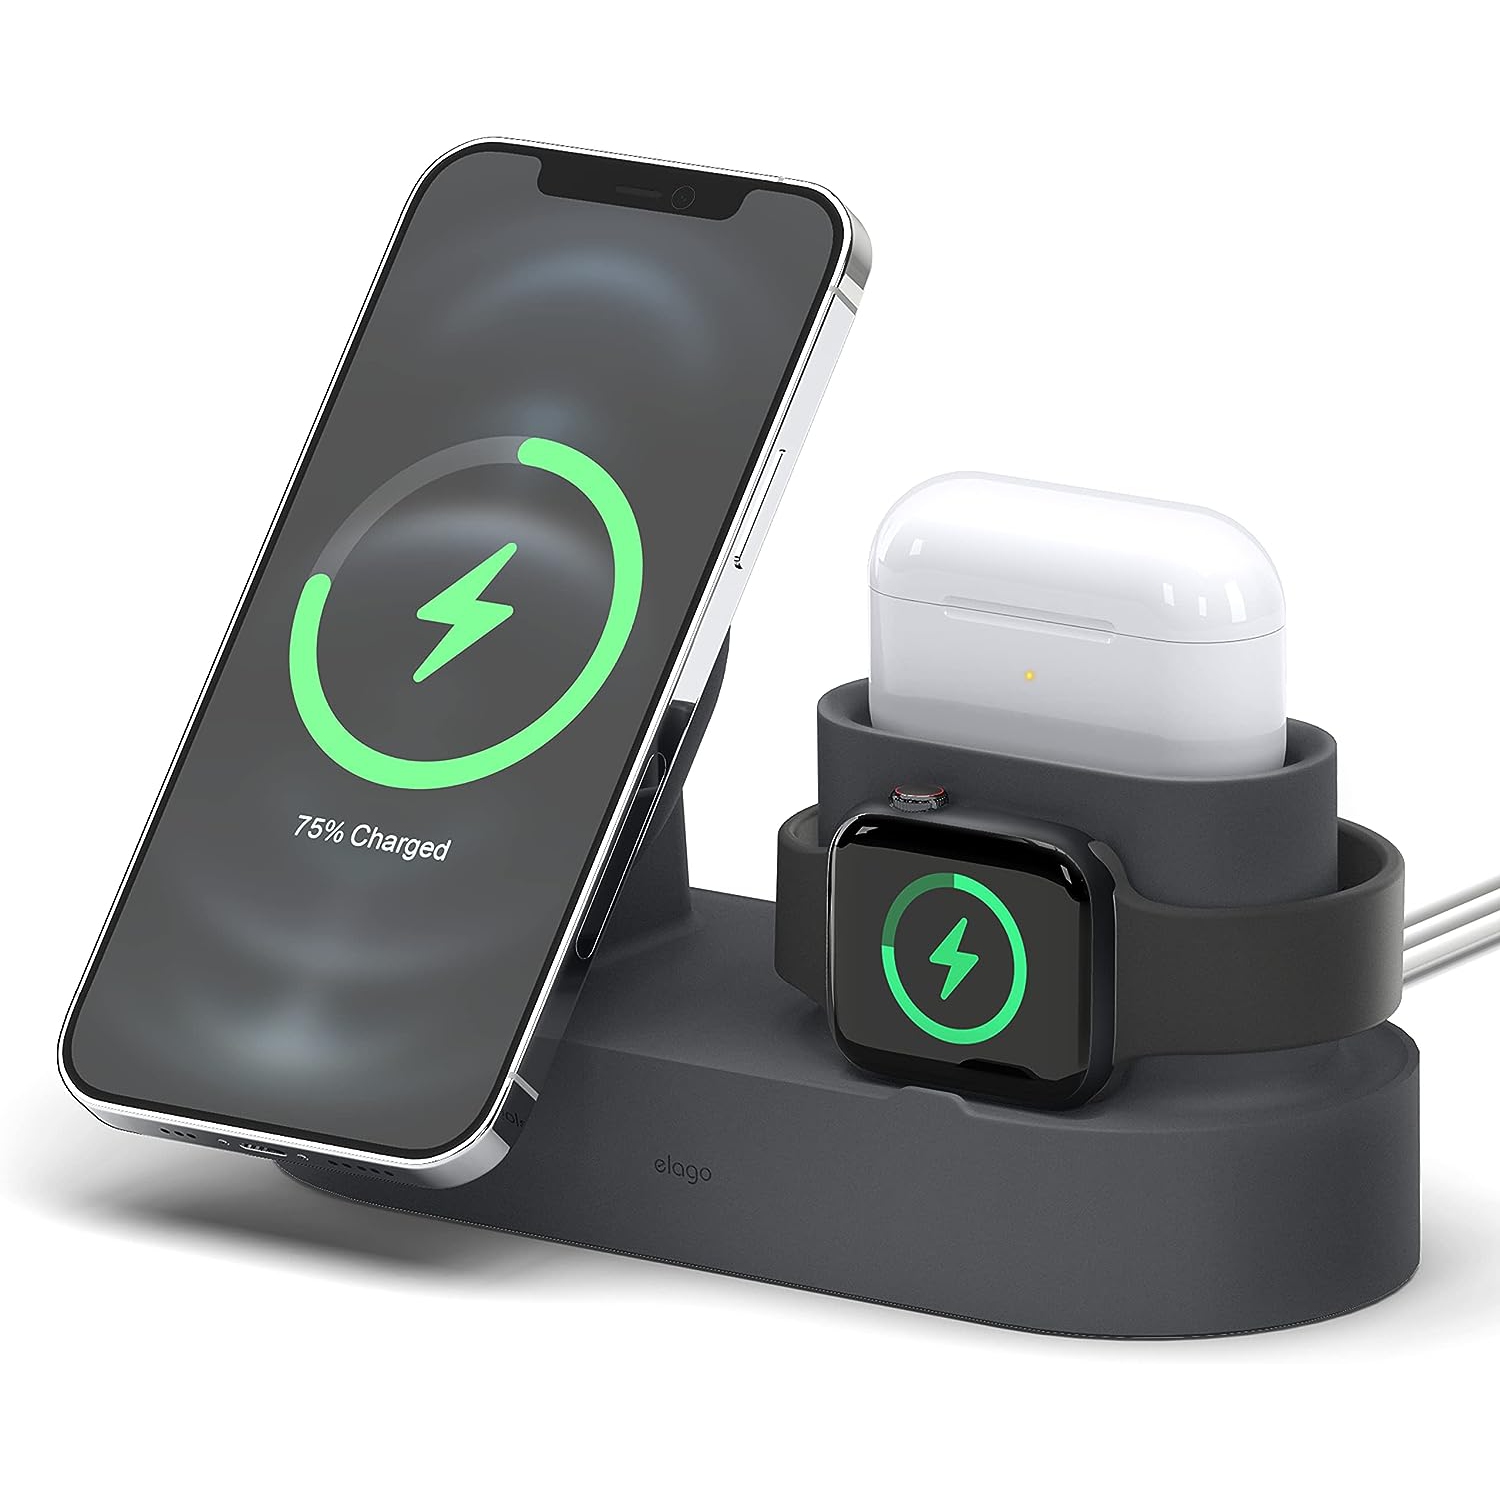 elago Trio 2 Wireless Charging Station for Desk Compatible with MagSafe, iPhone 12, AirPods Pro - 3 in 1 Phone Stand [Dark Grey] [Charging Cables Not Included]